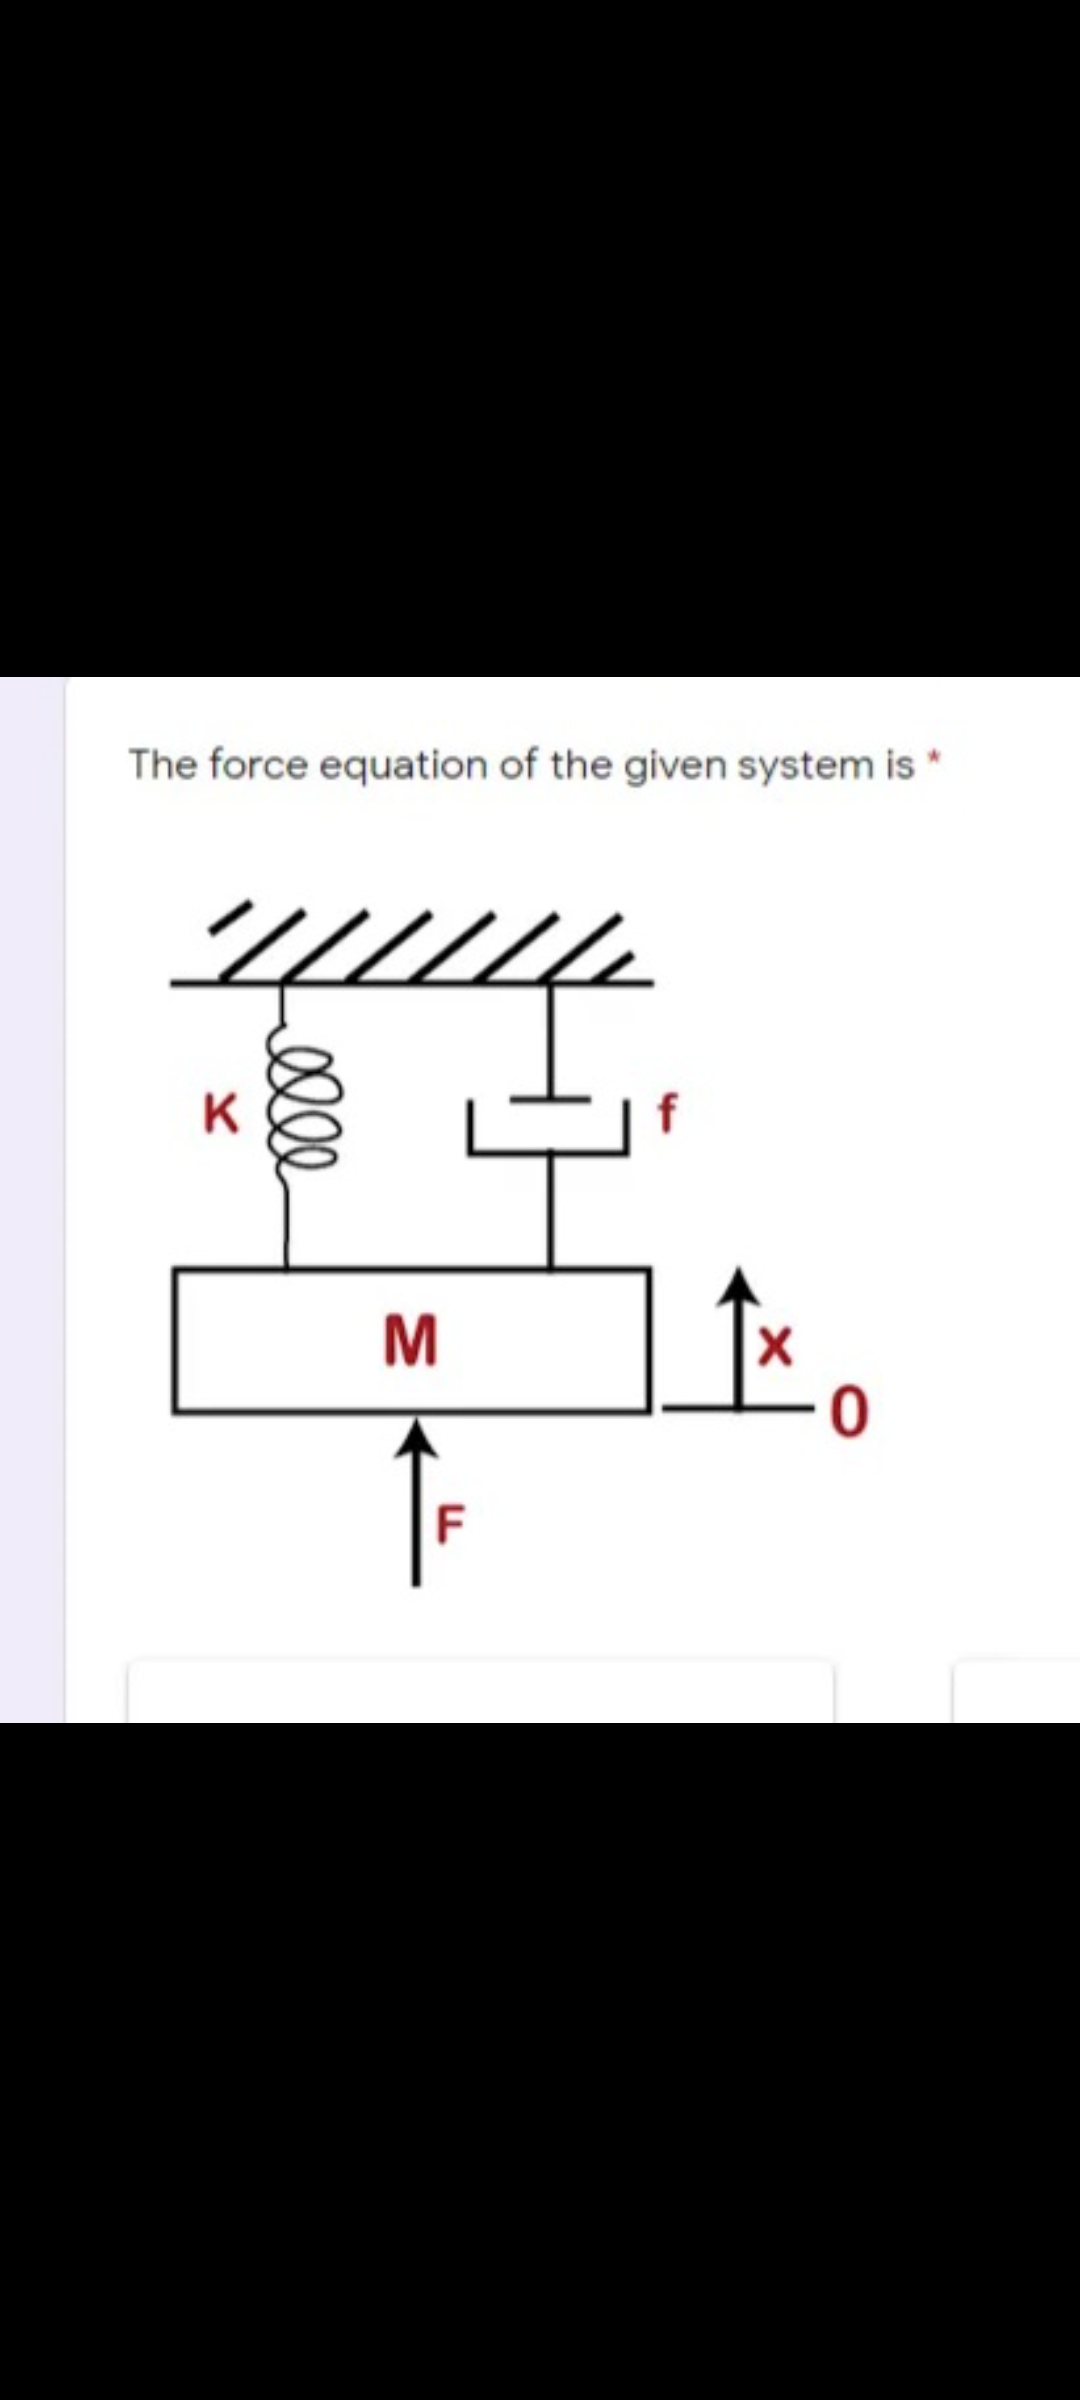 The force equation of the given system is *
K
F
